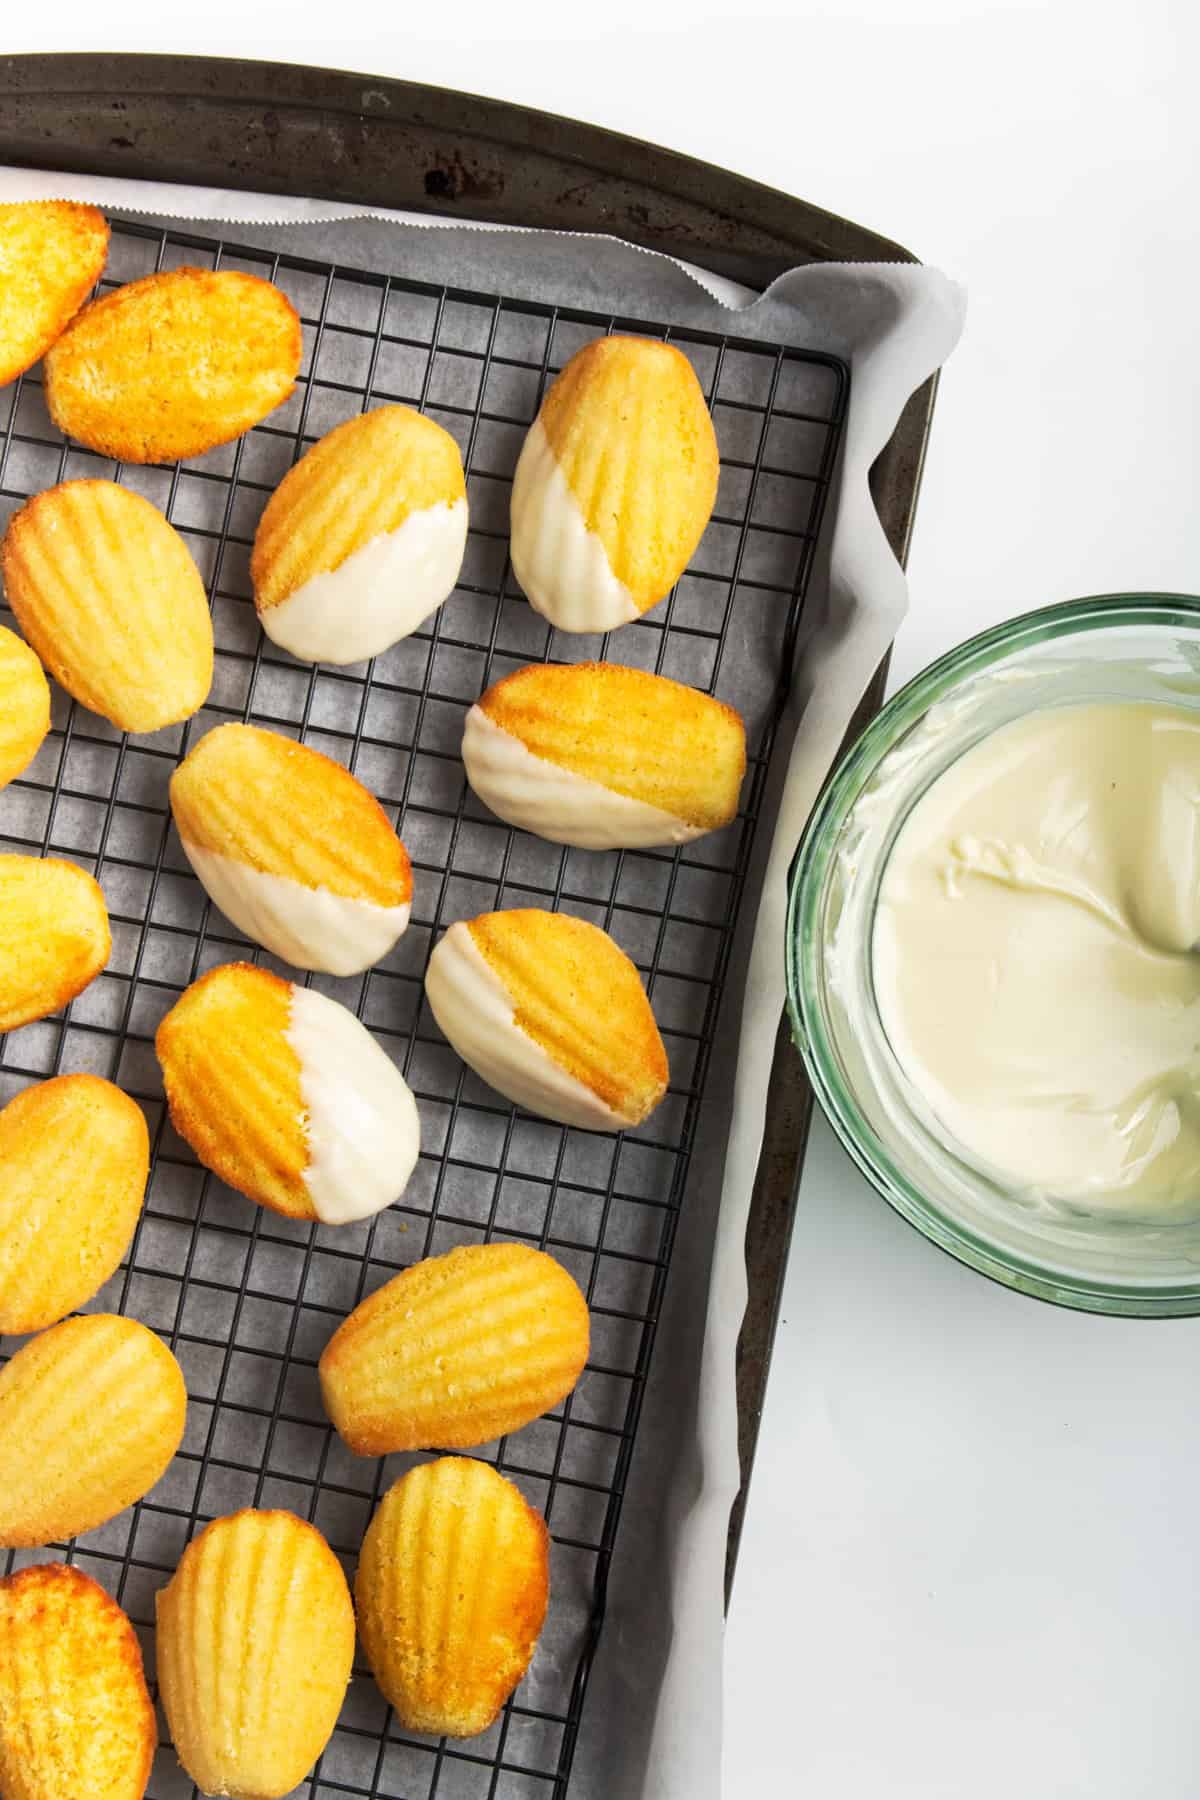 White chocolate dipped madeleines.